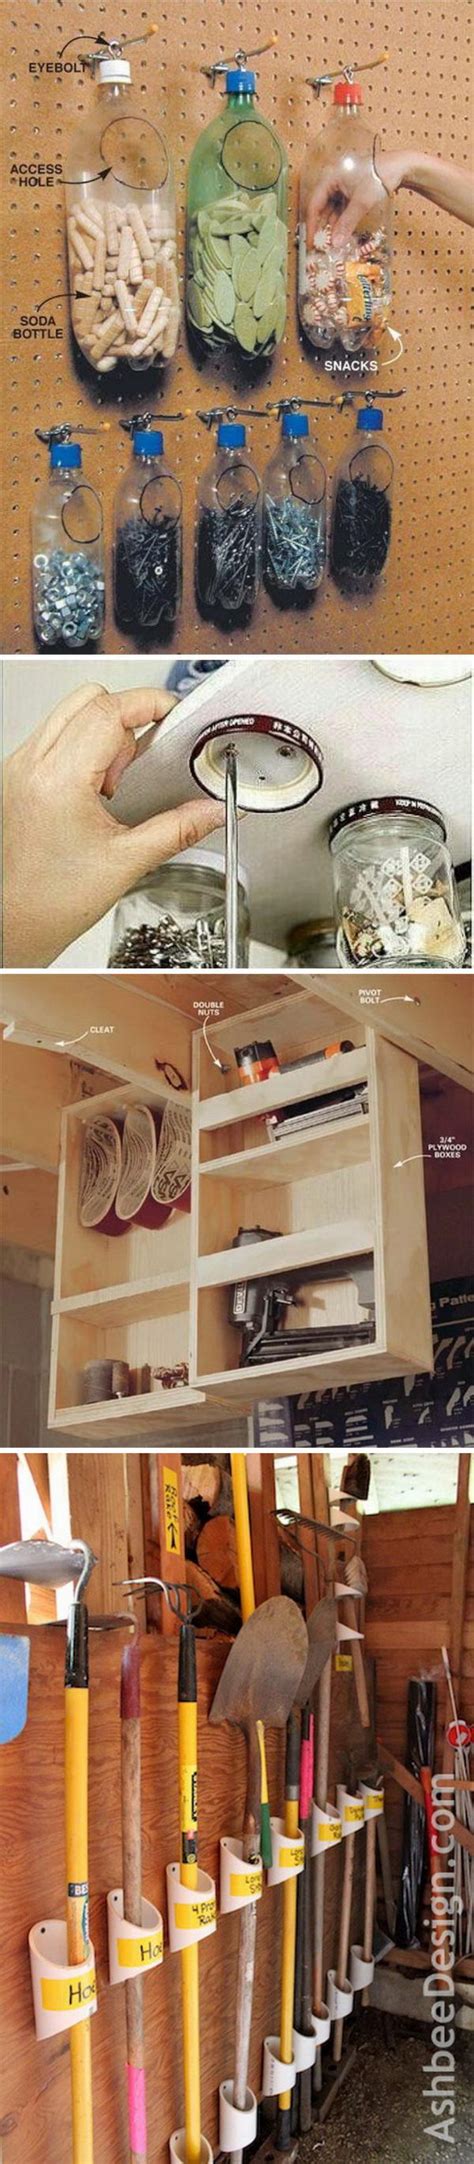 Start with these 34 cool diy projects which are sure to make quick order of things, plus they are inexpensive and many are easy to make. 30 Great DIY Ideas for Garage Storage and Organization